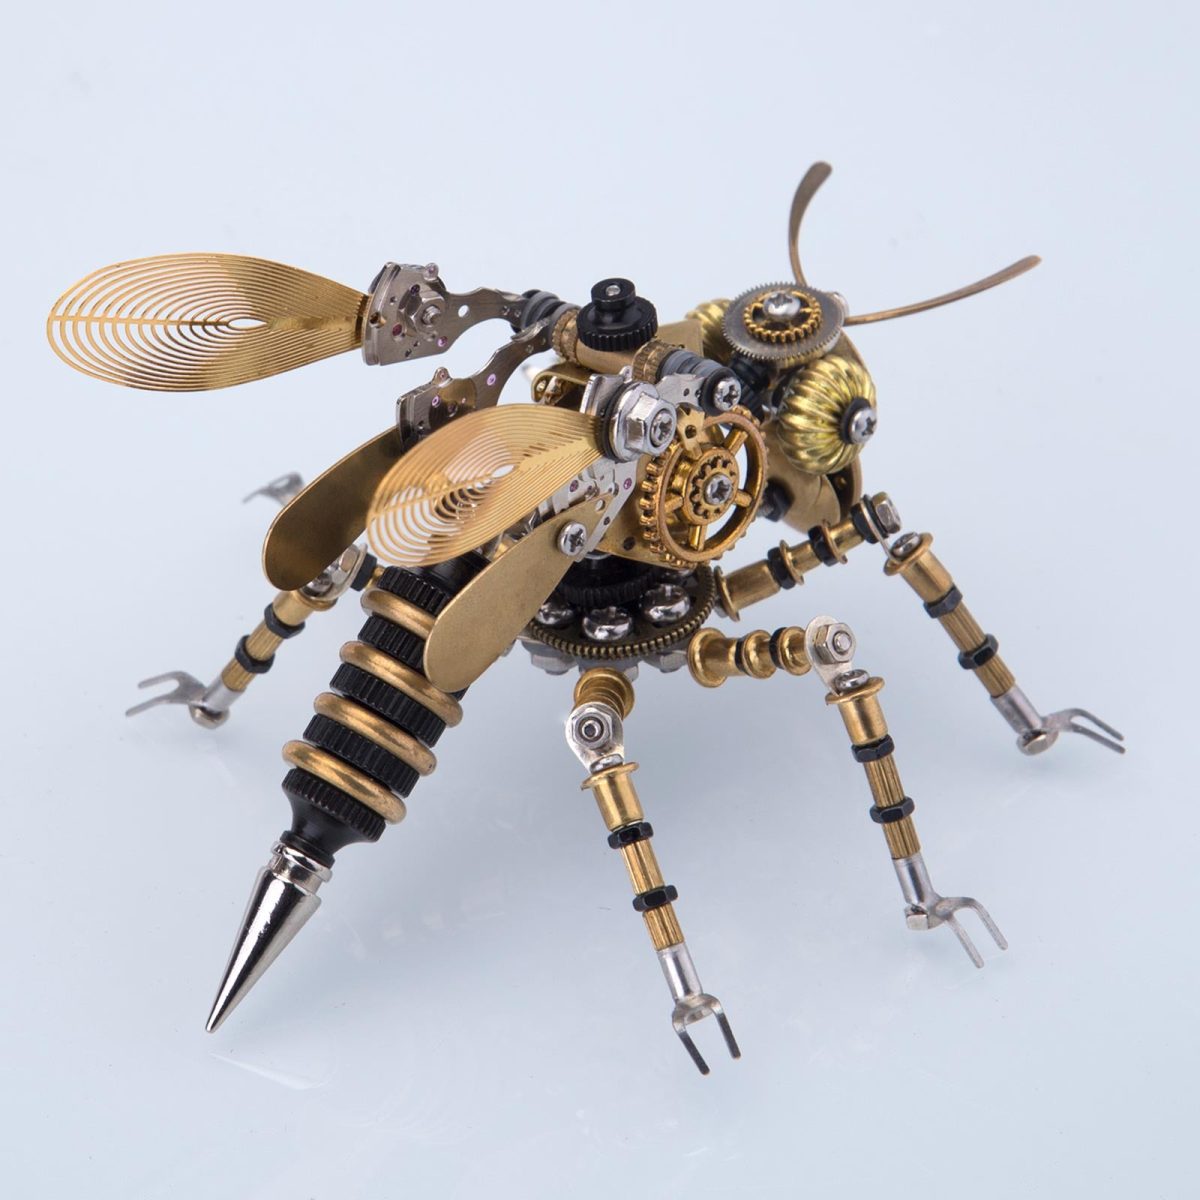 Steampunk Wasp 3D Metal Insect Model Kit